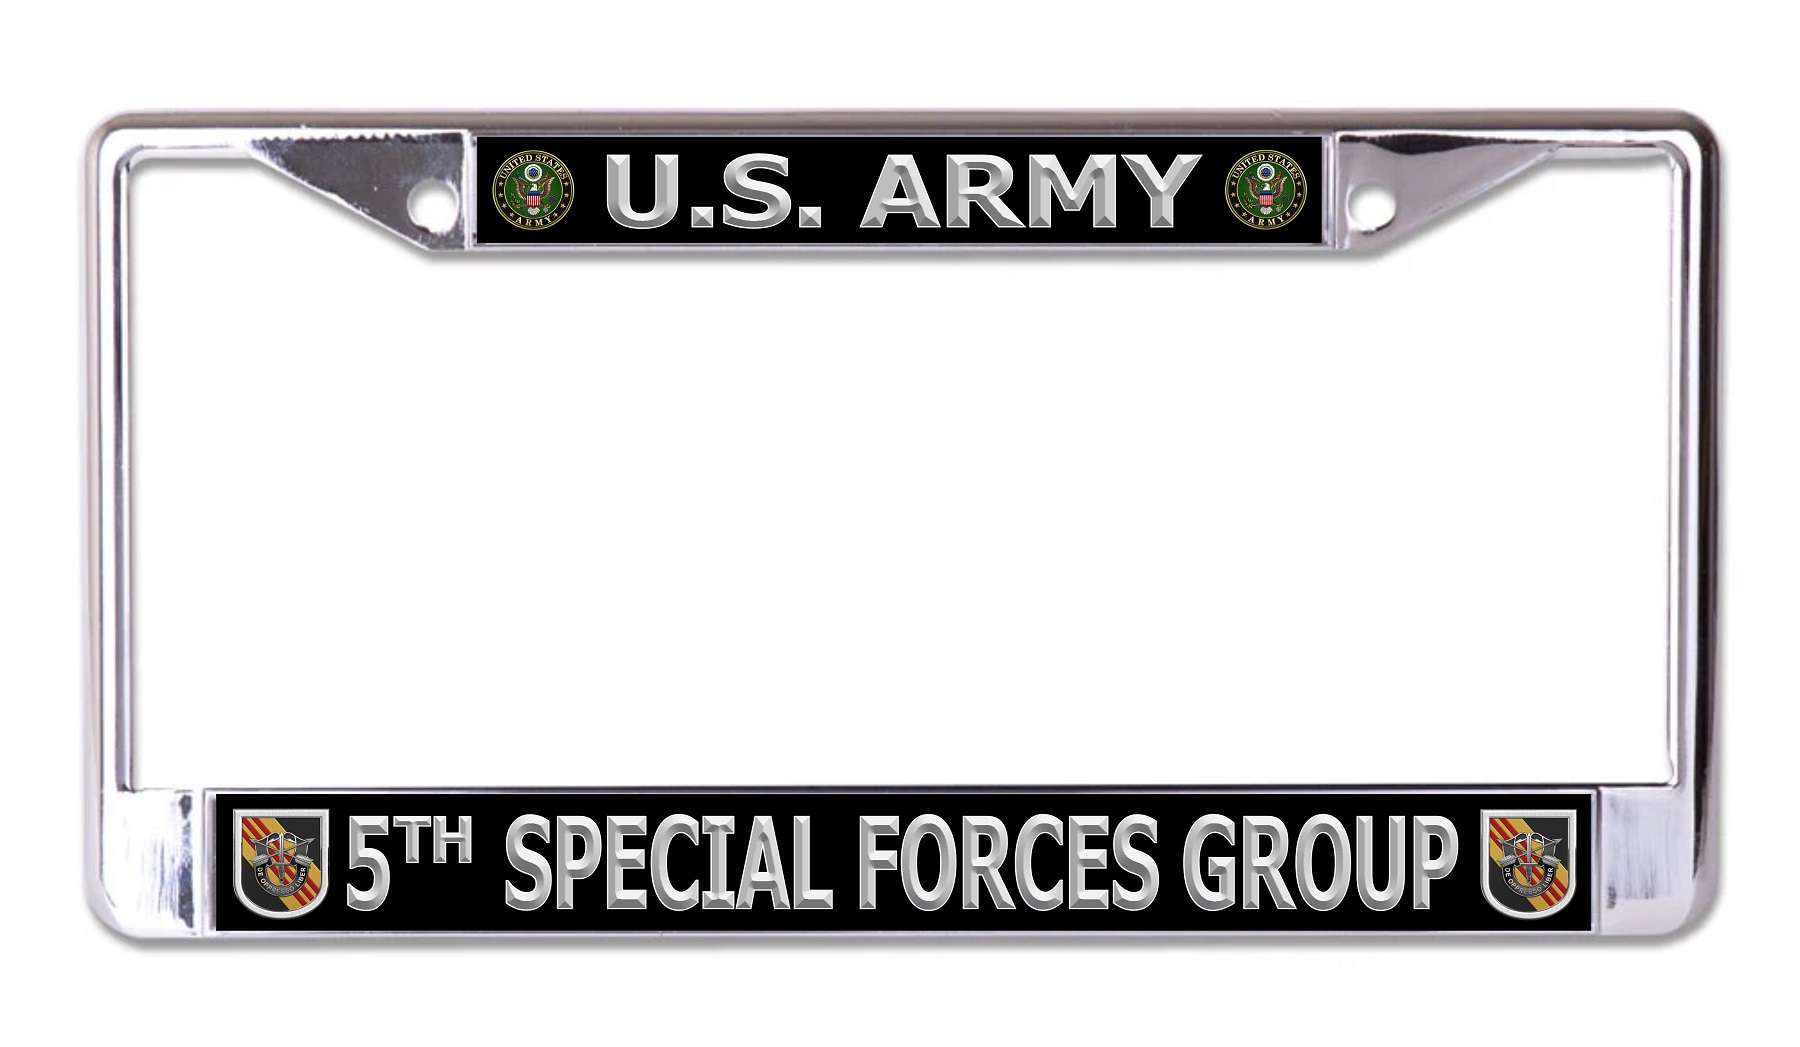 License Plates Online U.S. Army 5th Special Forces Group Chrome License Plate Frame